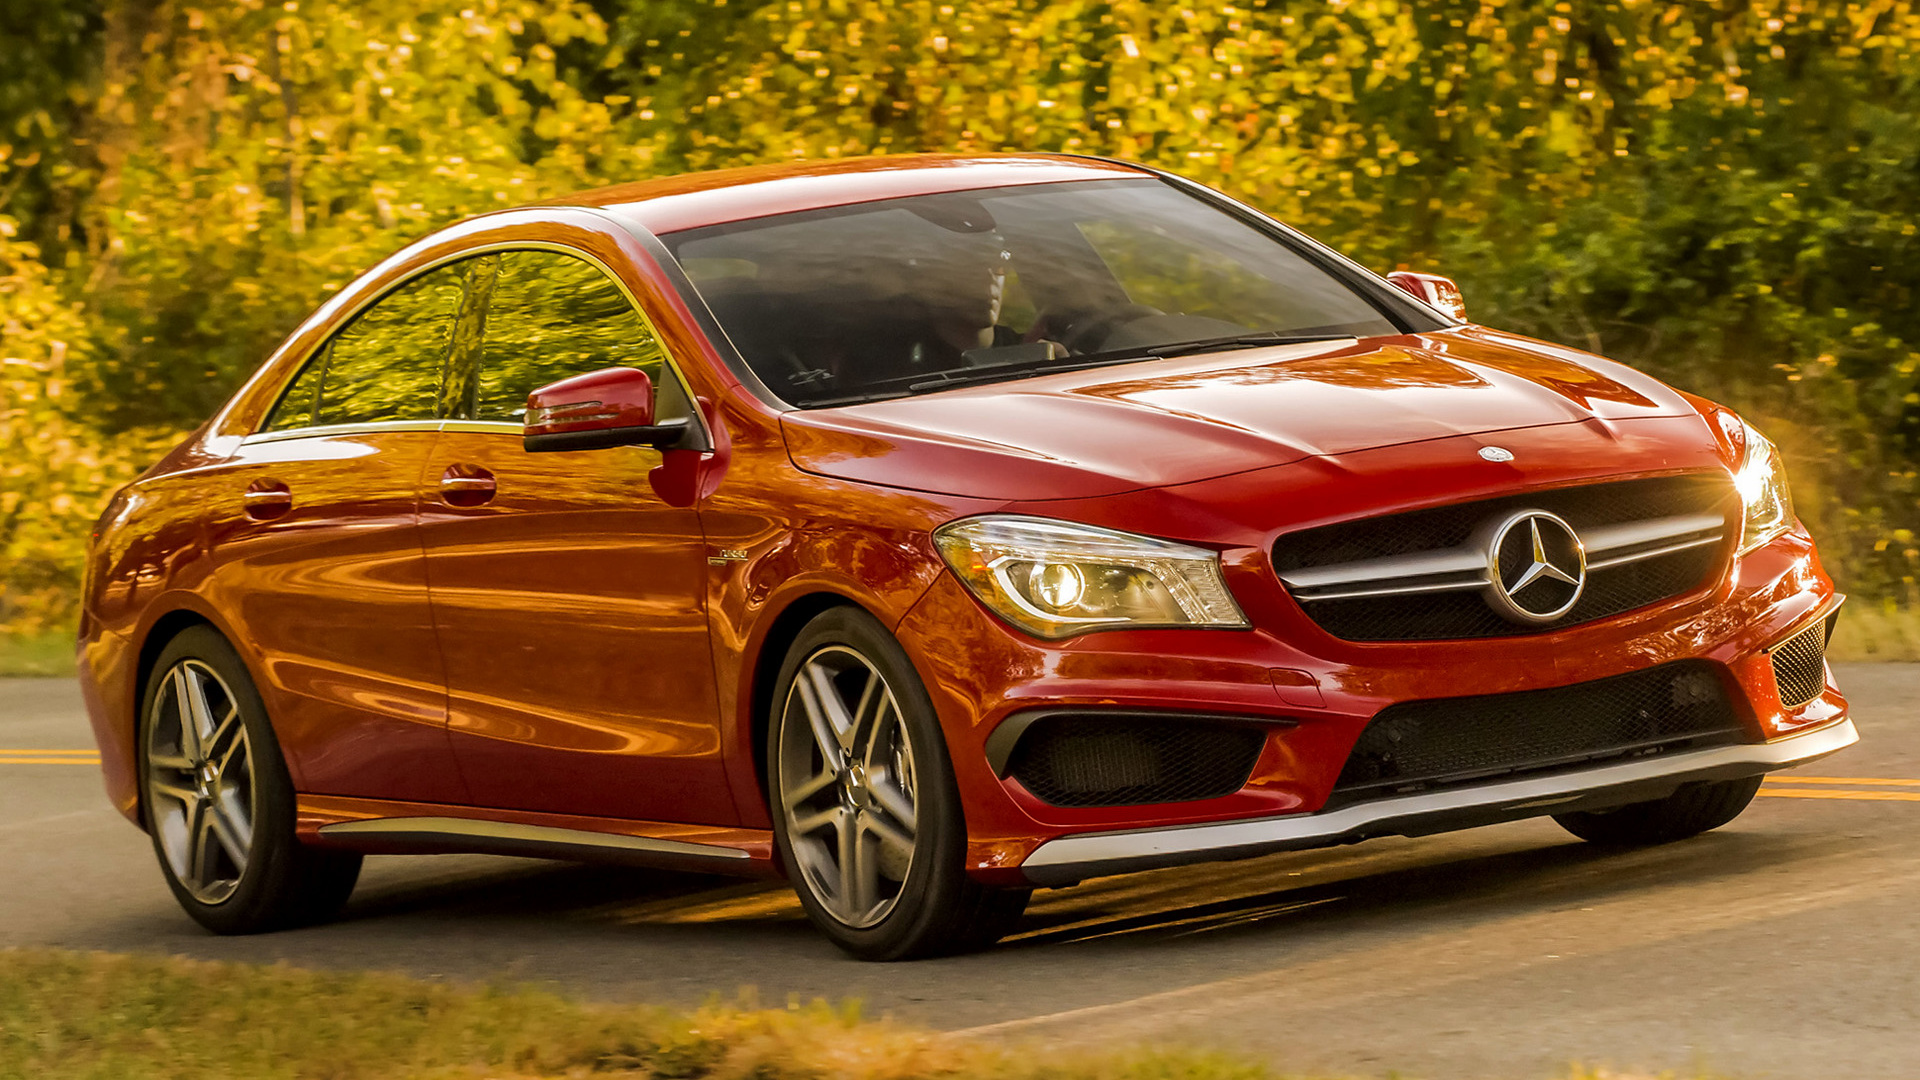 2014 Mercedes-Benz CLA 45 AMG (US) - Wallpapers and HD Images | Car Pixel